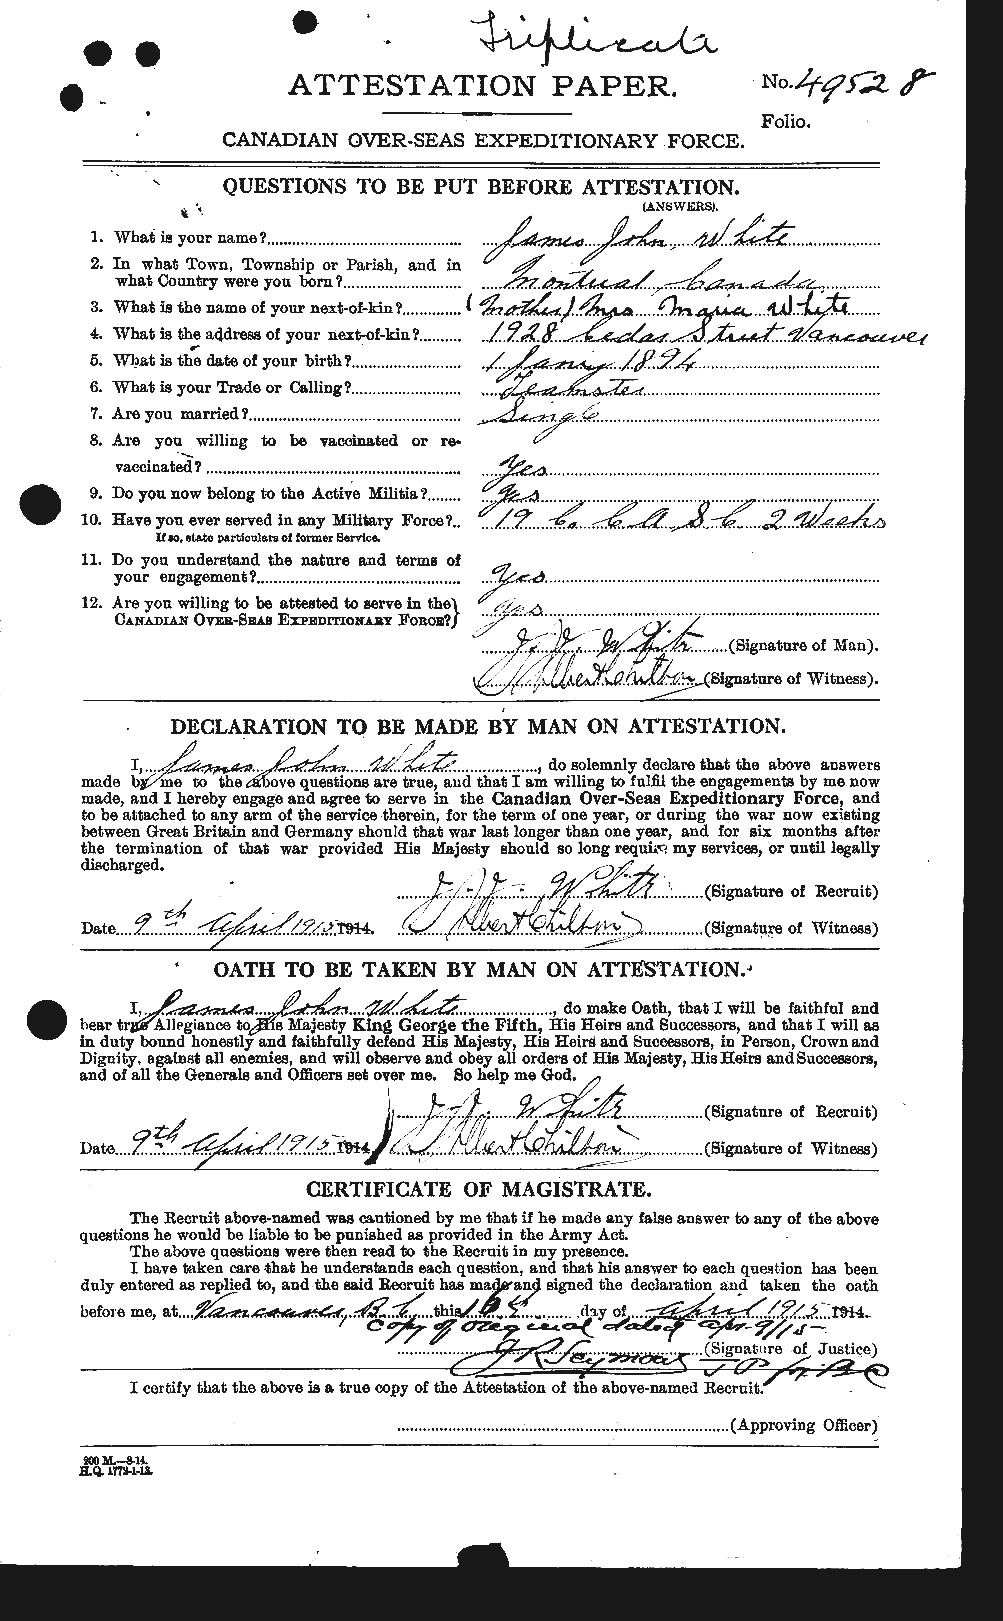 Personnel Records of the First World War - CEF 671455a